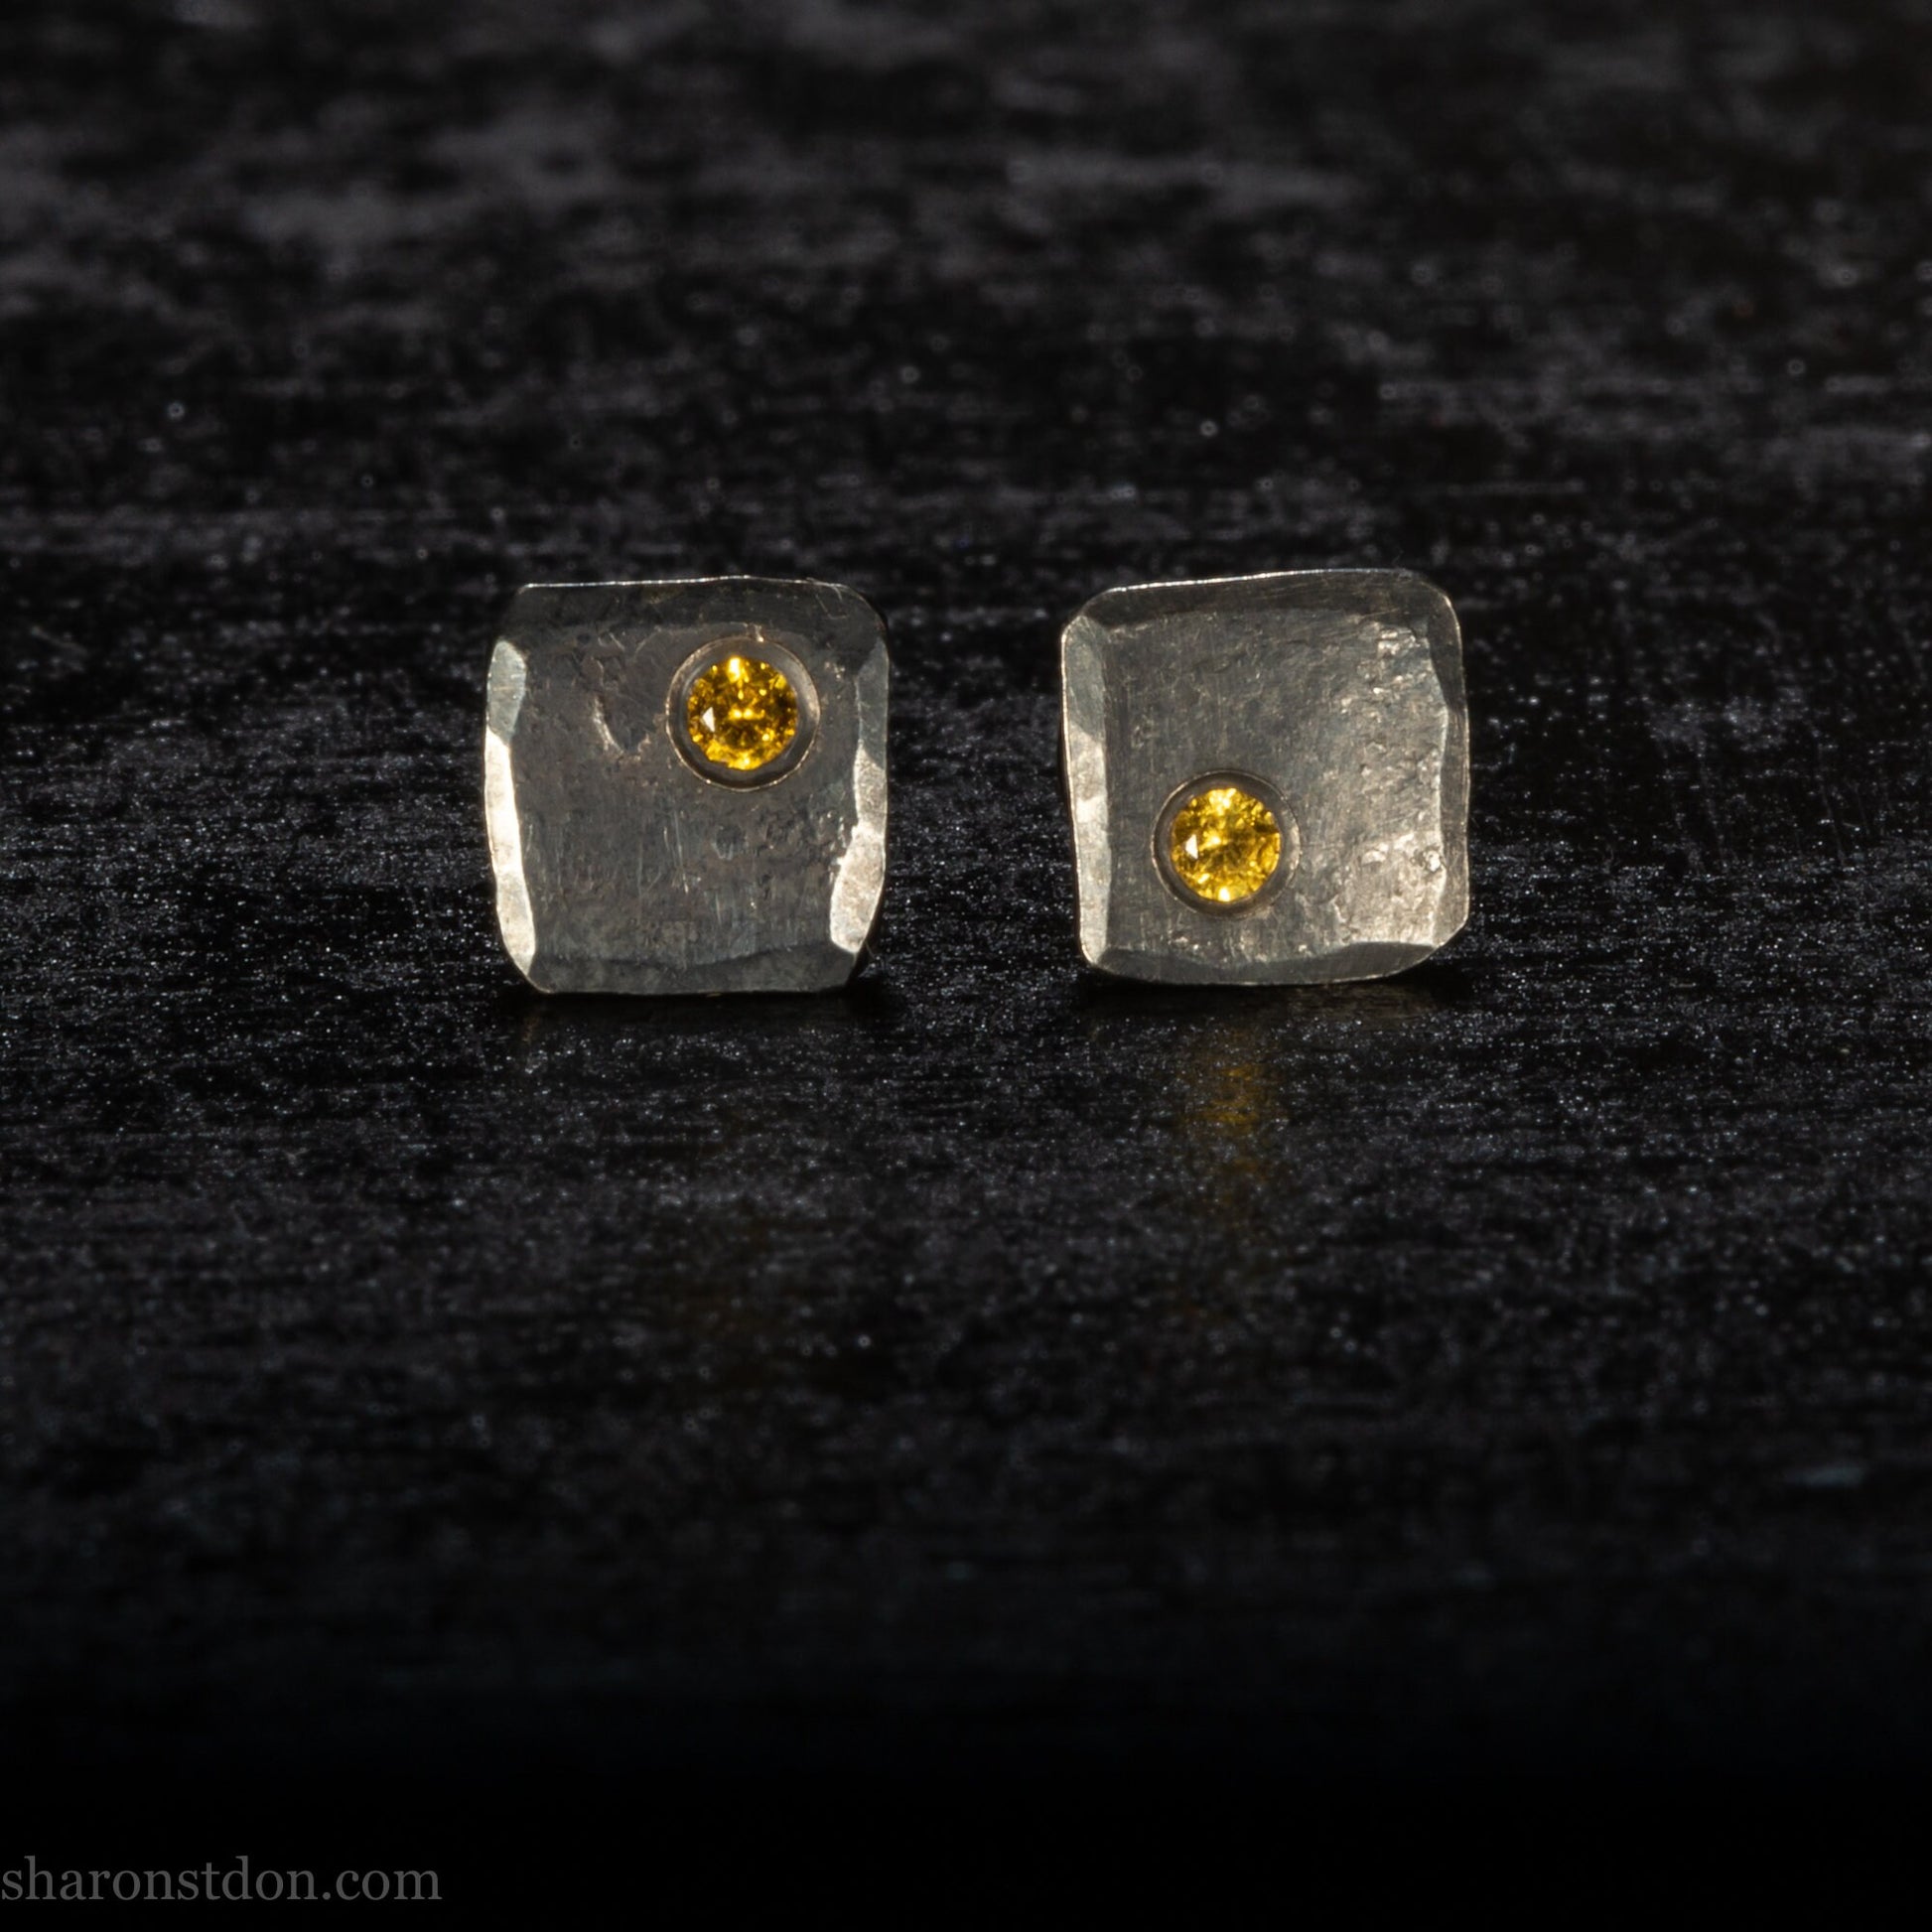 Canary yellow diamond gemstone stud earrings | 925 sterling silver small square stud earrings for men or women | Unique handmade gift